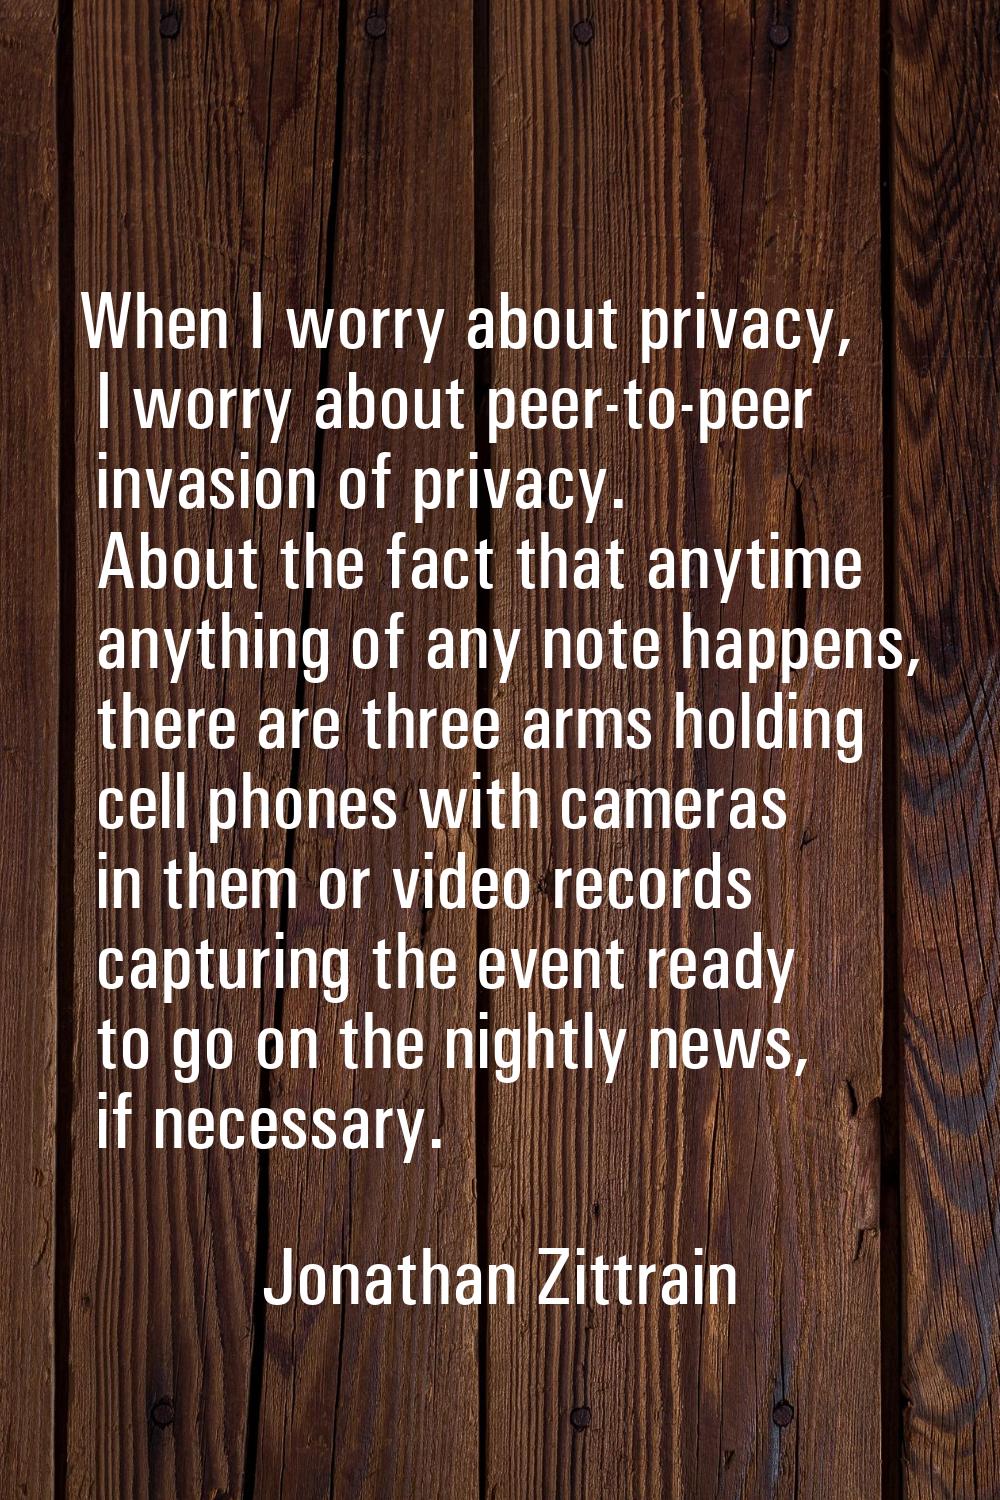 When I worry about privacy, I worry about peer-to-peer invasion of privacy. About the fact that any